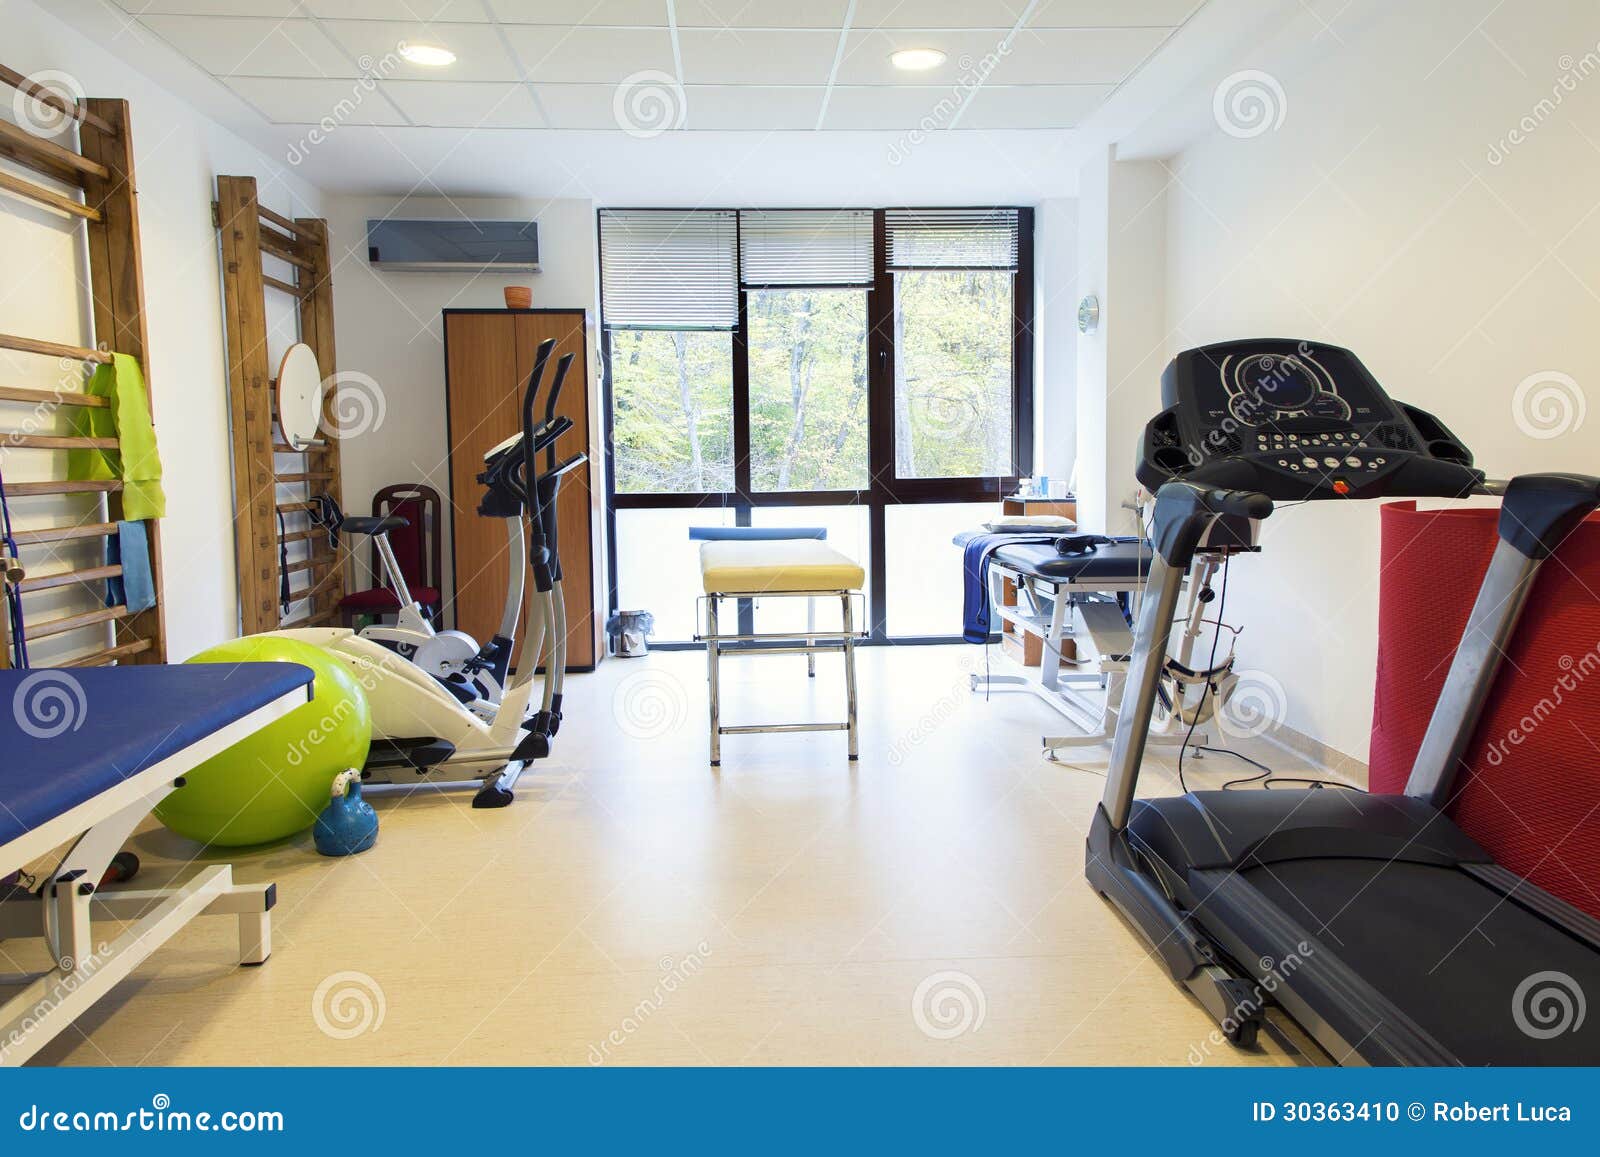 Physiotherapy Room In Spa Center Stock Photo Image Of Body Equipment